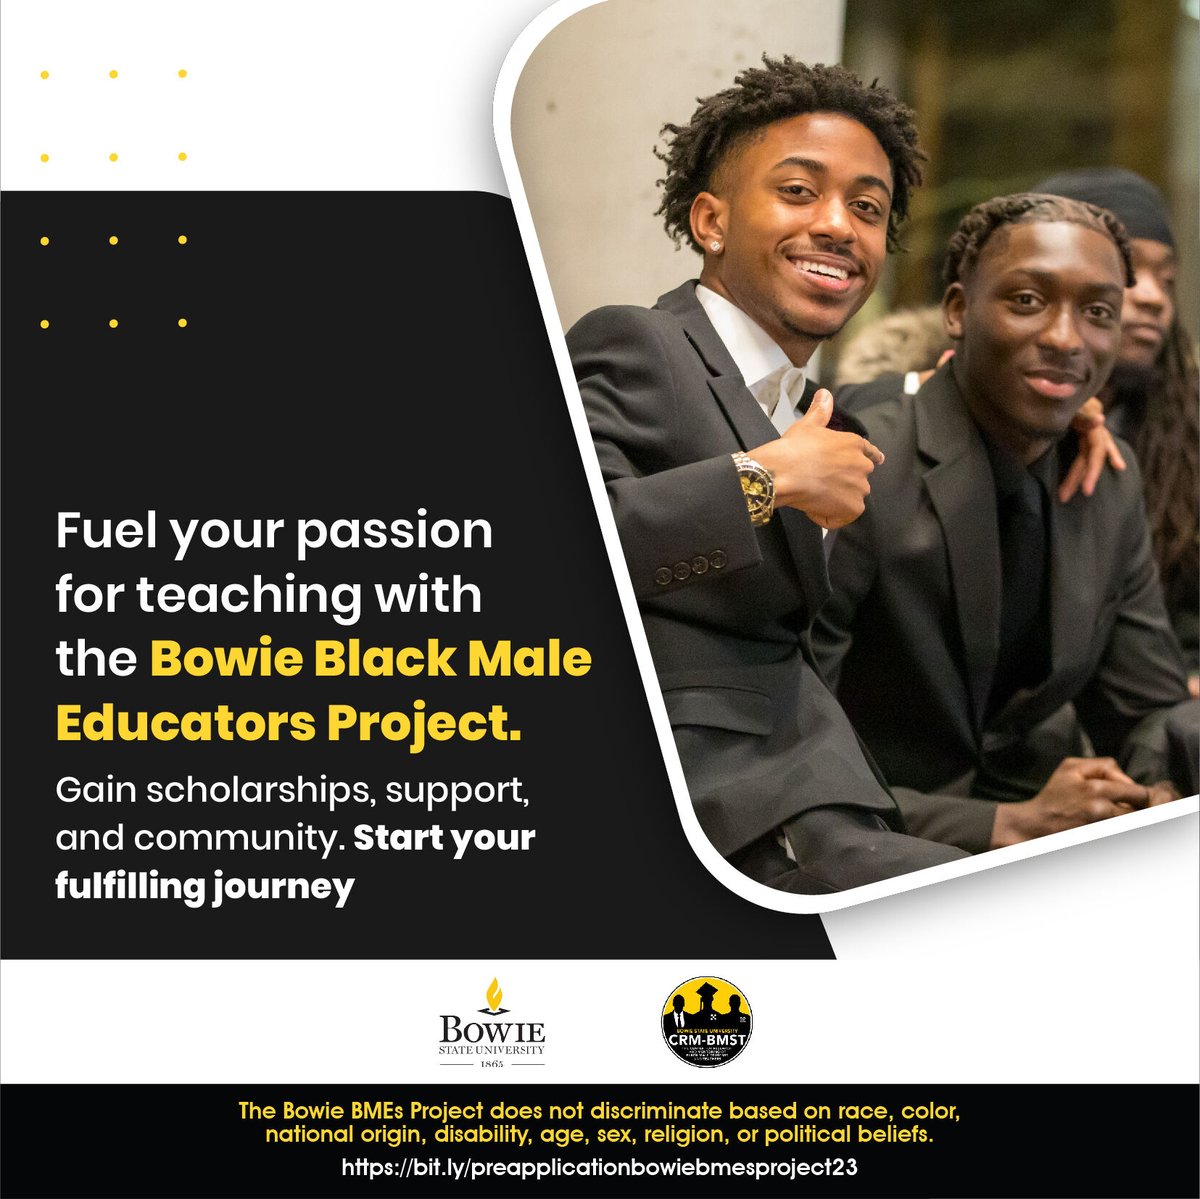 Pursue your passion for education with the Bowie Black Male Educators Project. Our program offers a unique opportunity to become a highly effective teacher through evidence-based, culturally grounded pedagogy.

Apply Today:🌐 bit.ly/preapplication…

#blackteachers #educators